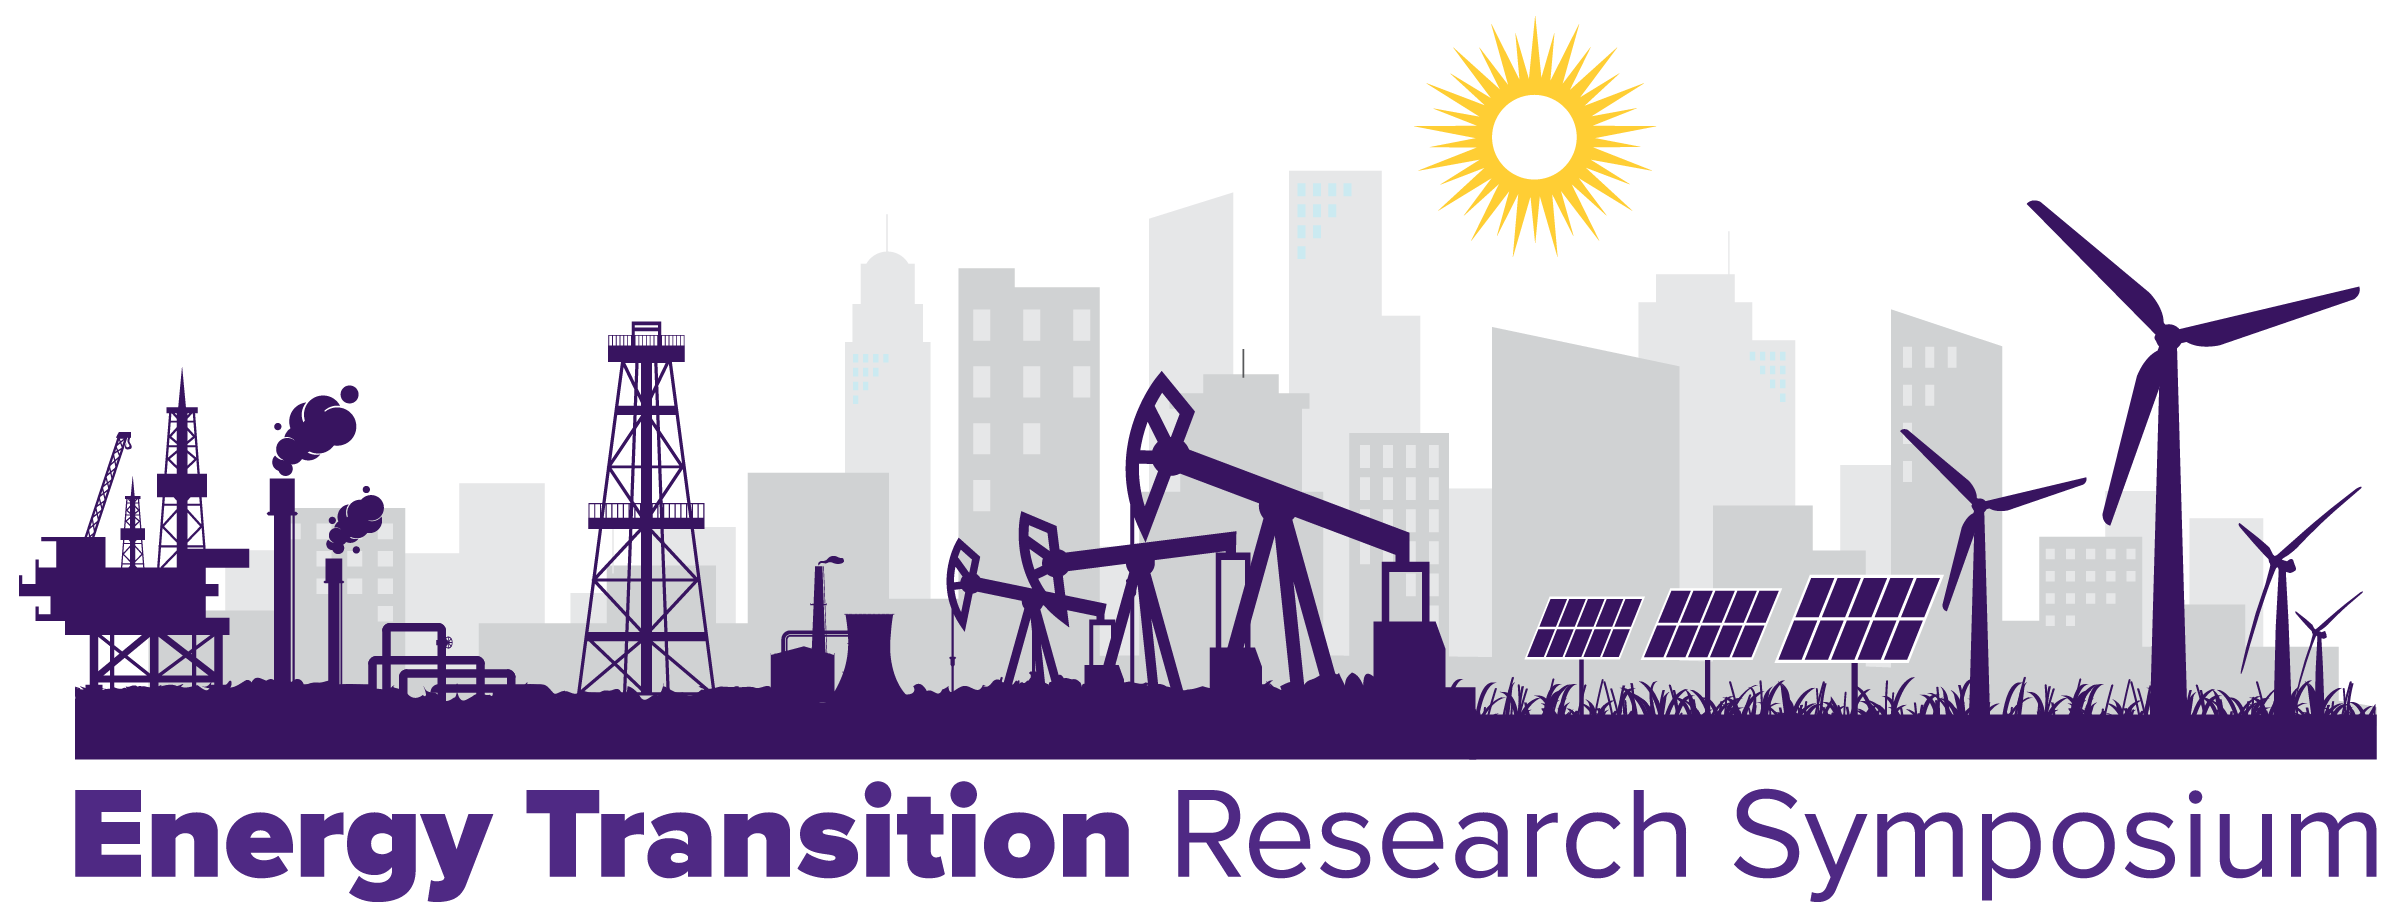 energy transition research symposium logo showing oil rigs, solar panels, wind mills